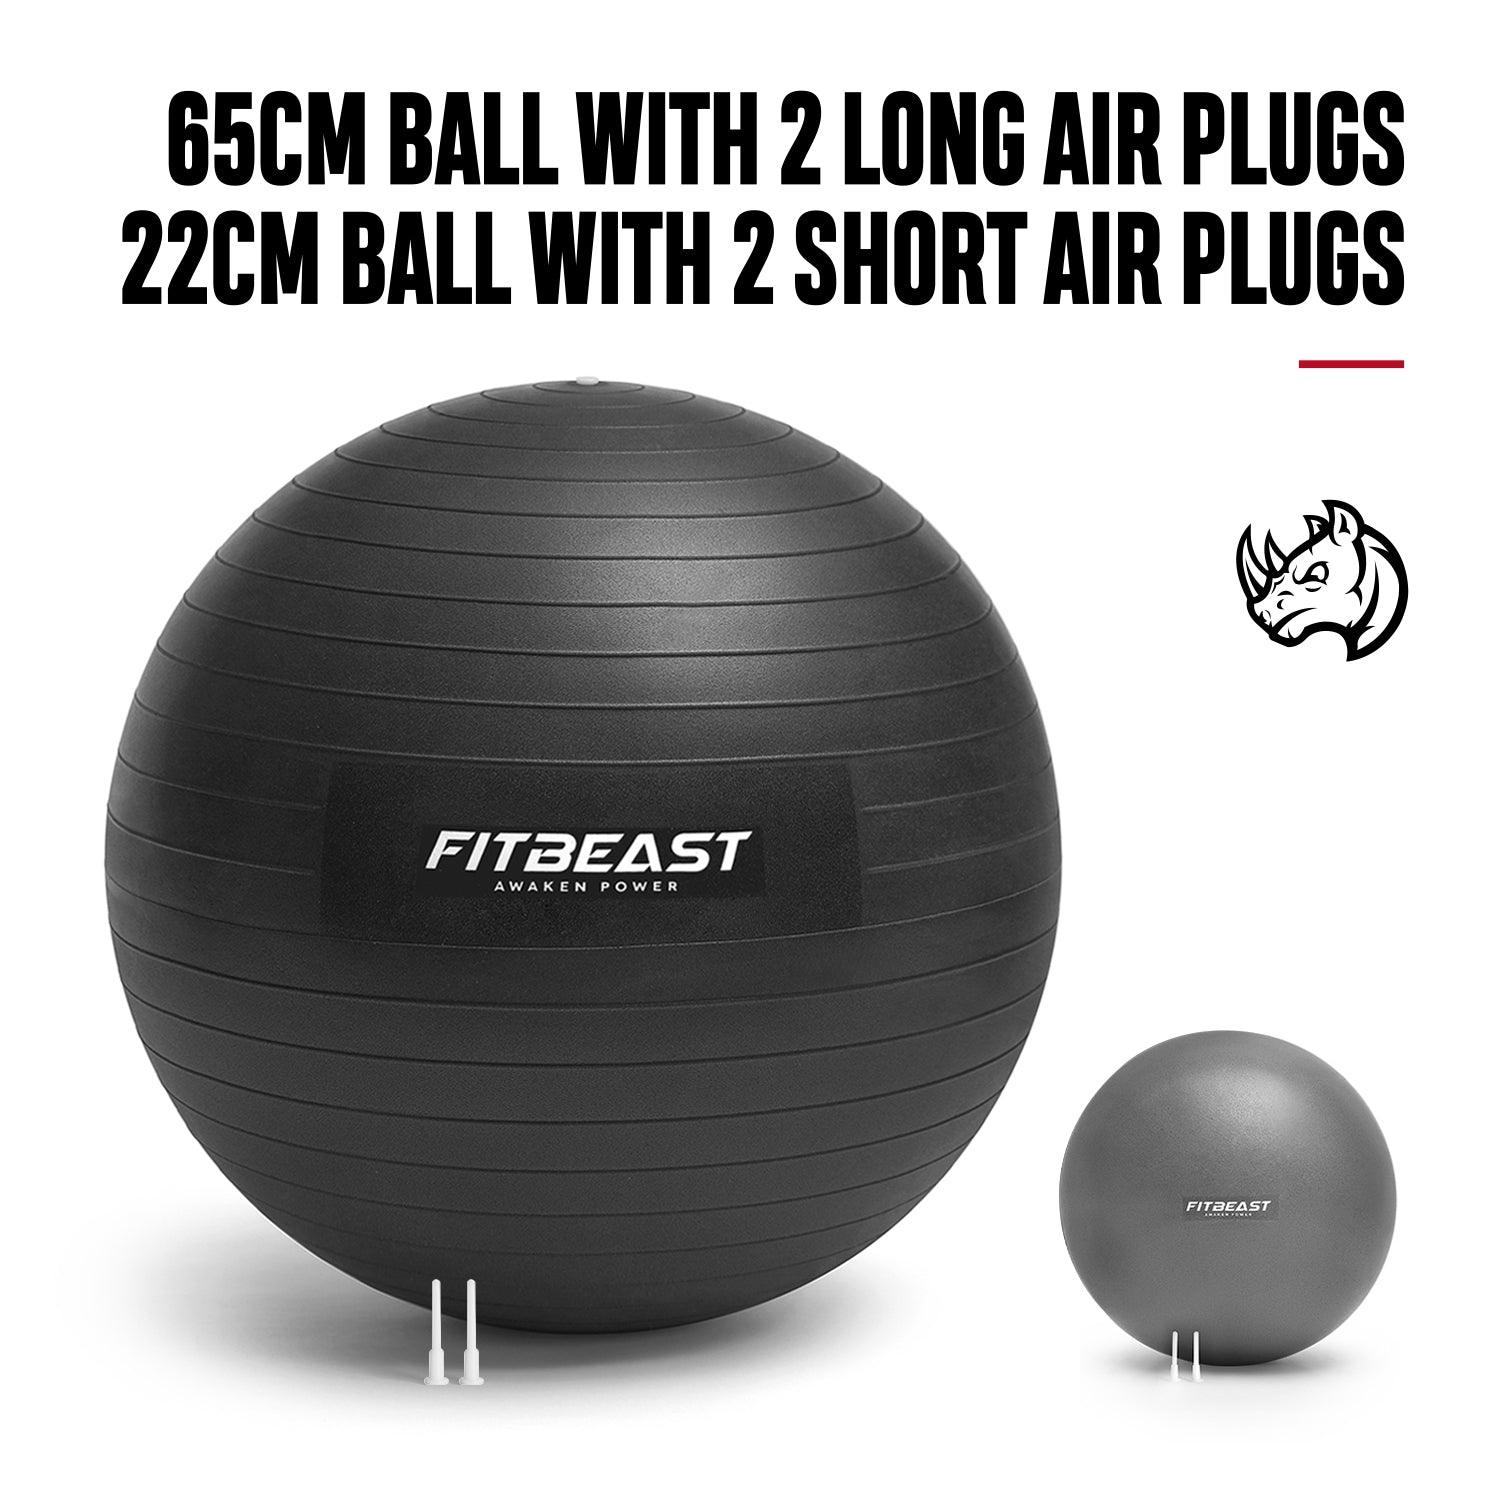 FitBeast 75cm Yoga Ball for Home, Office, or Relaxation - Black